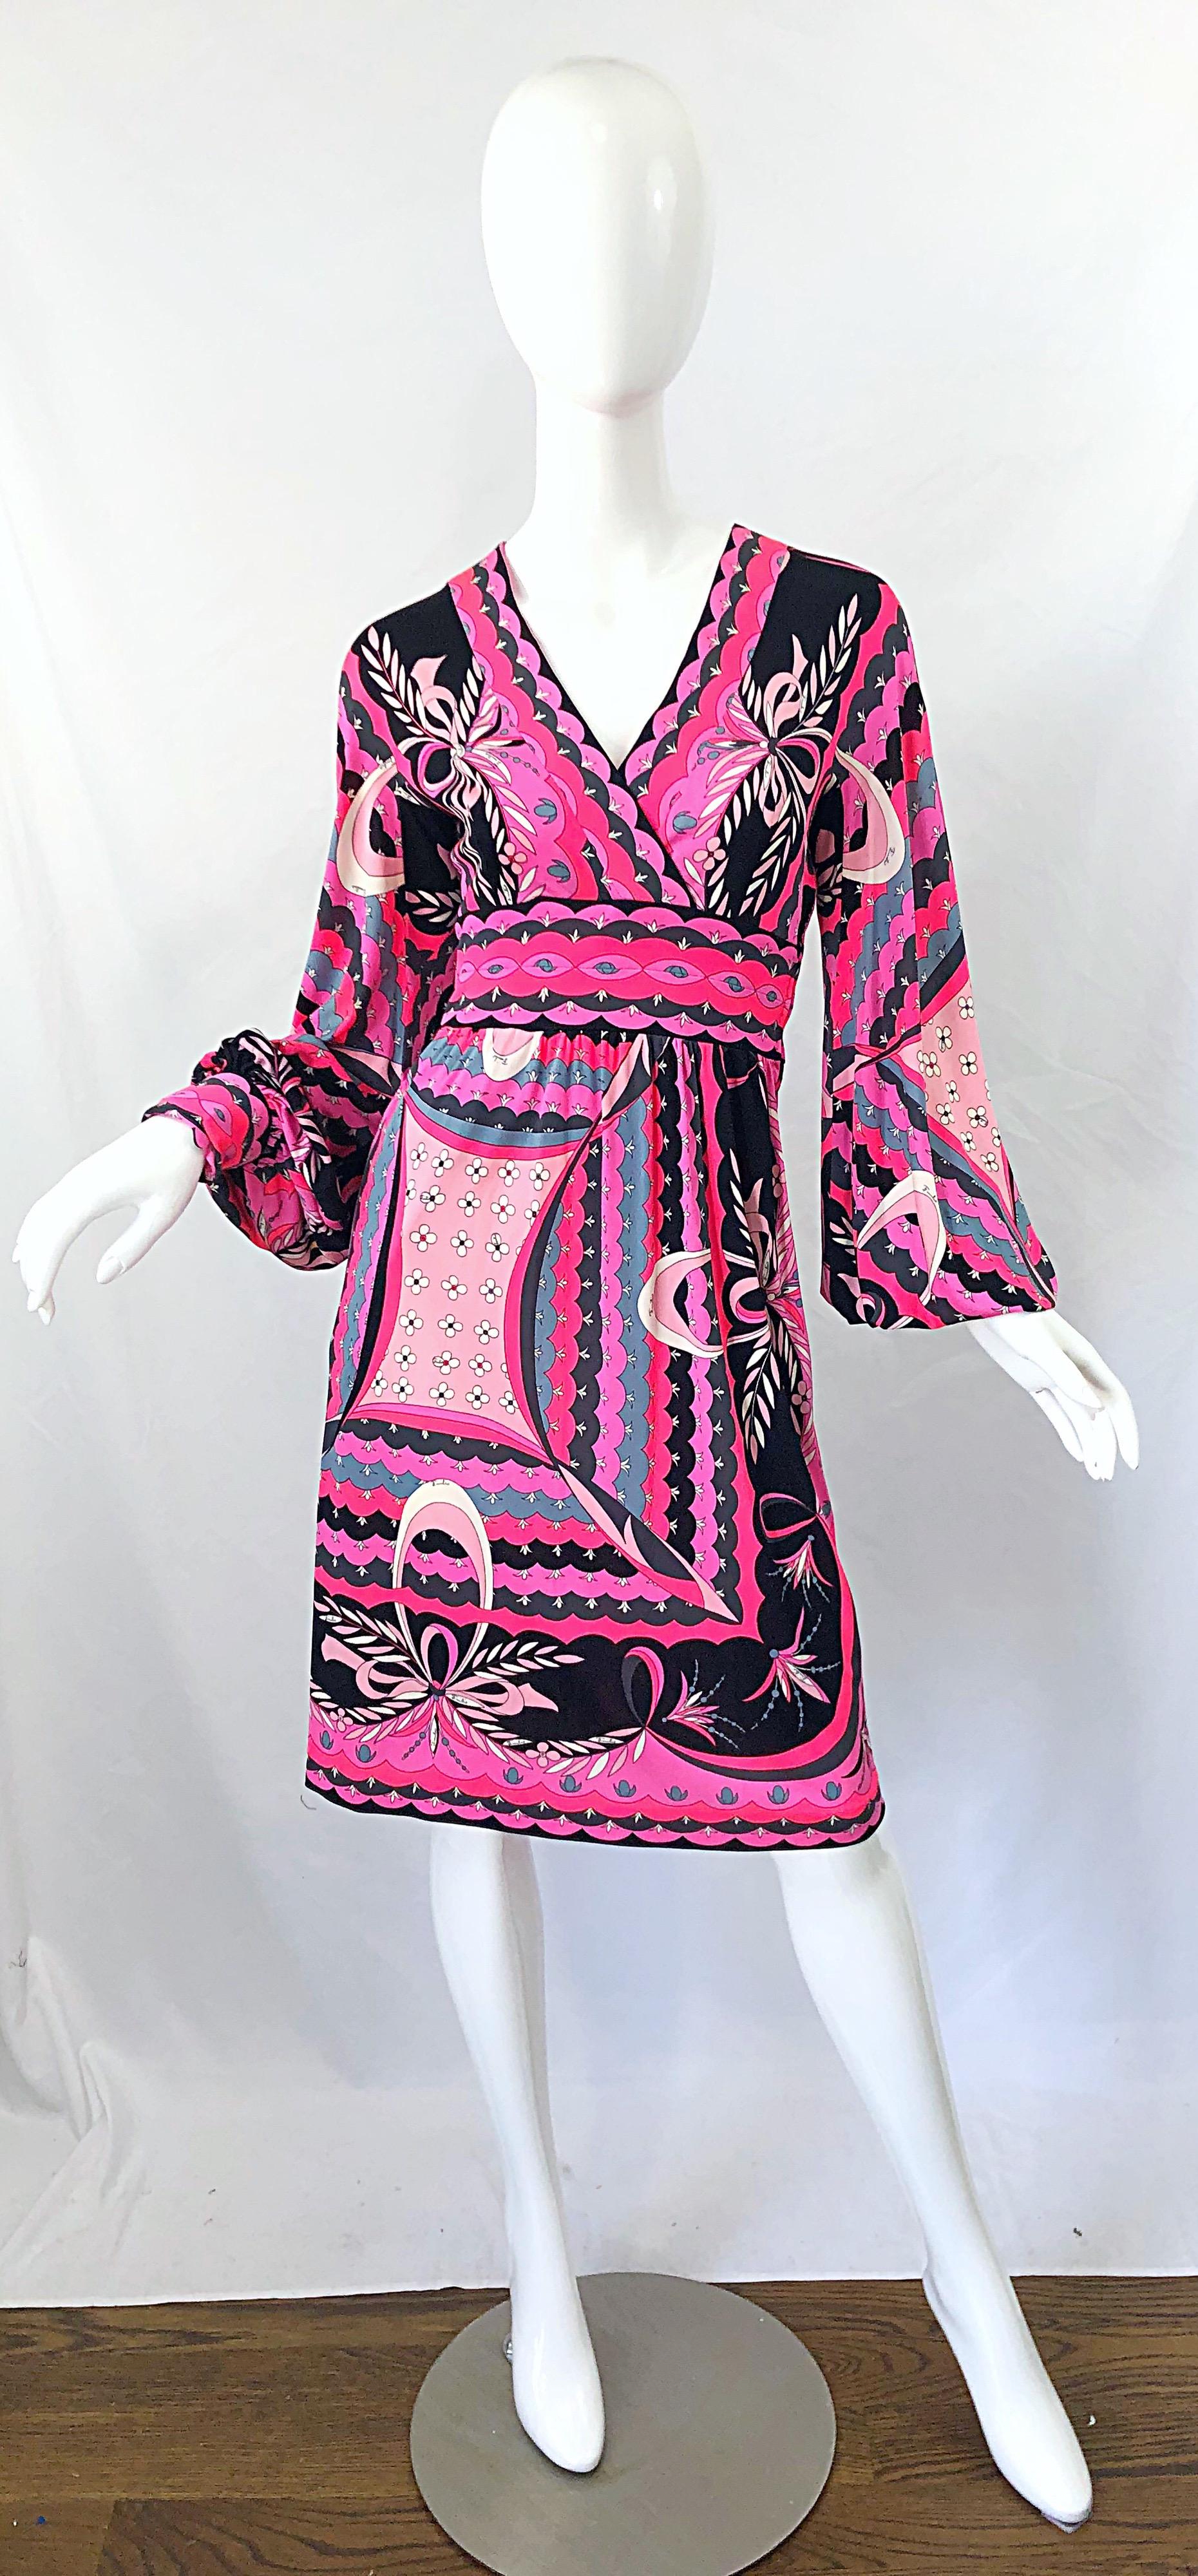 Beautiful 1970s EMILIO PUCCI silk jersey dress ! Features vibrant colors of hot pink, light pink, grey, black and white throughout. Signature kaleidoscope print. V-neck bodice with a flowy skirt. Billow sleeves with two snaps at each sleeve cuffs.